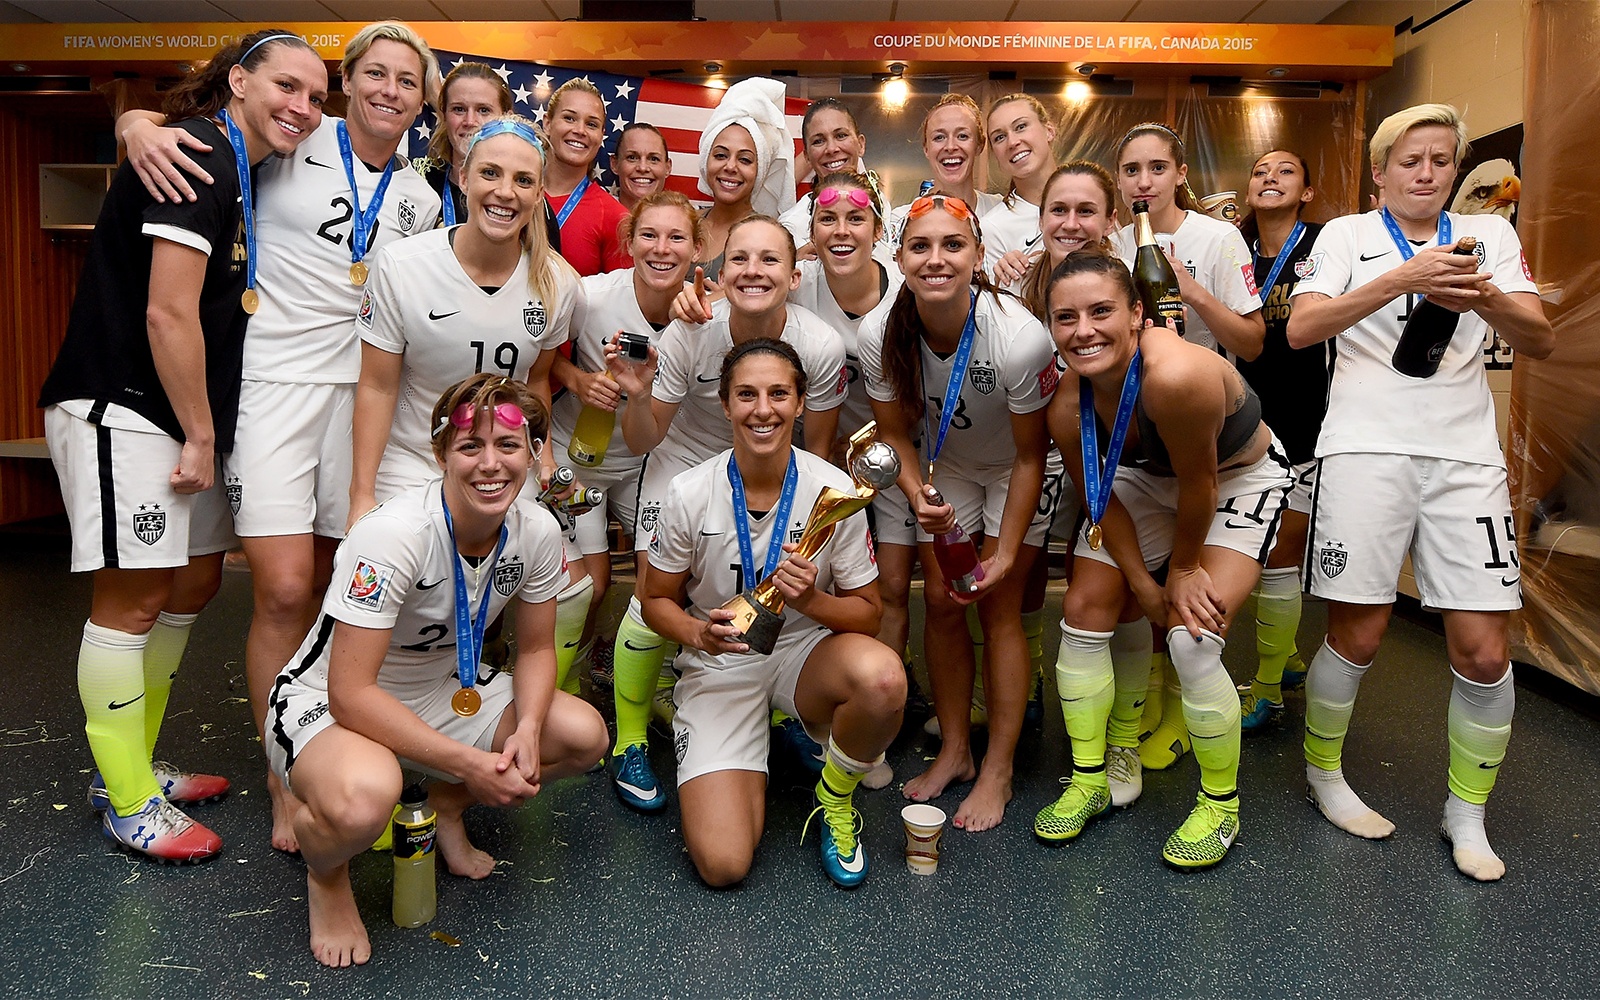 U.S. Women’s Soccer Team Is Officially Getting a Ticker-Tape Parade